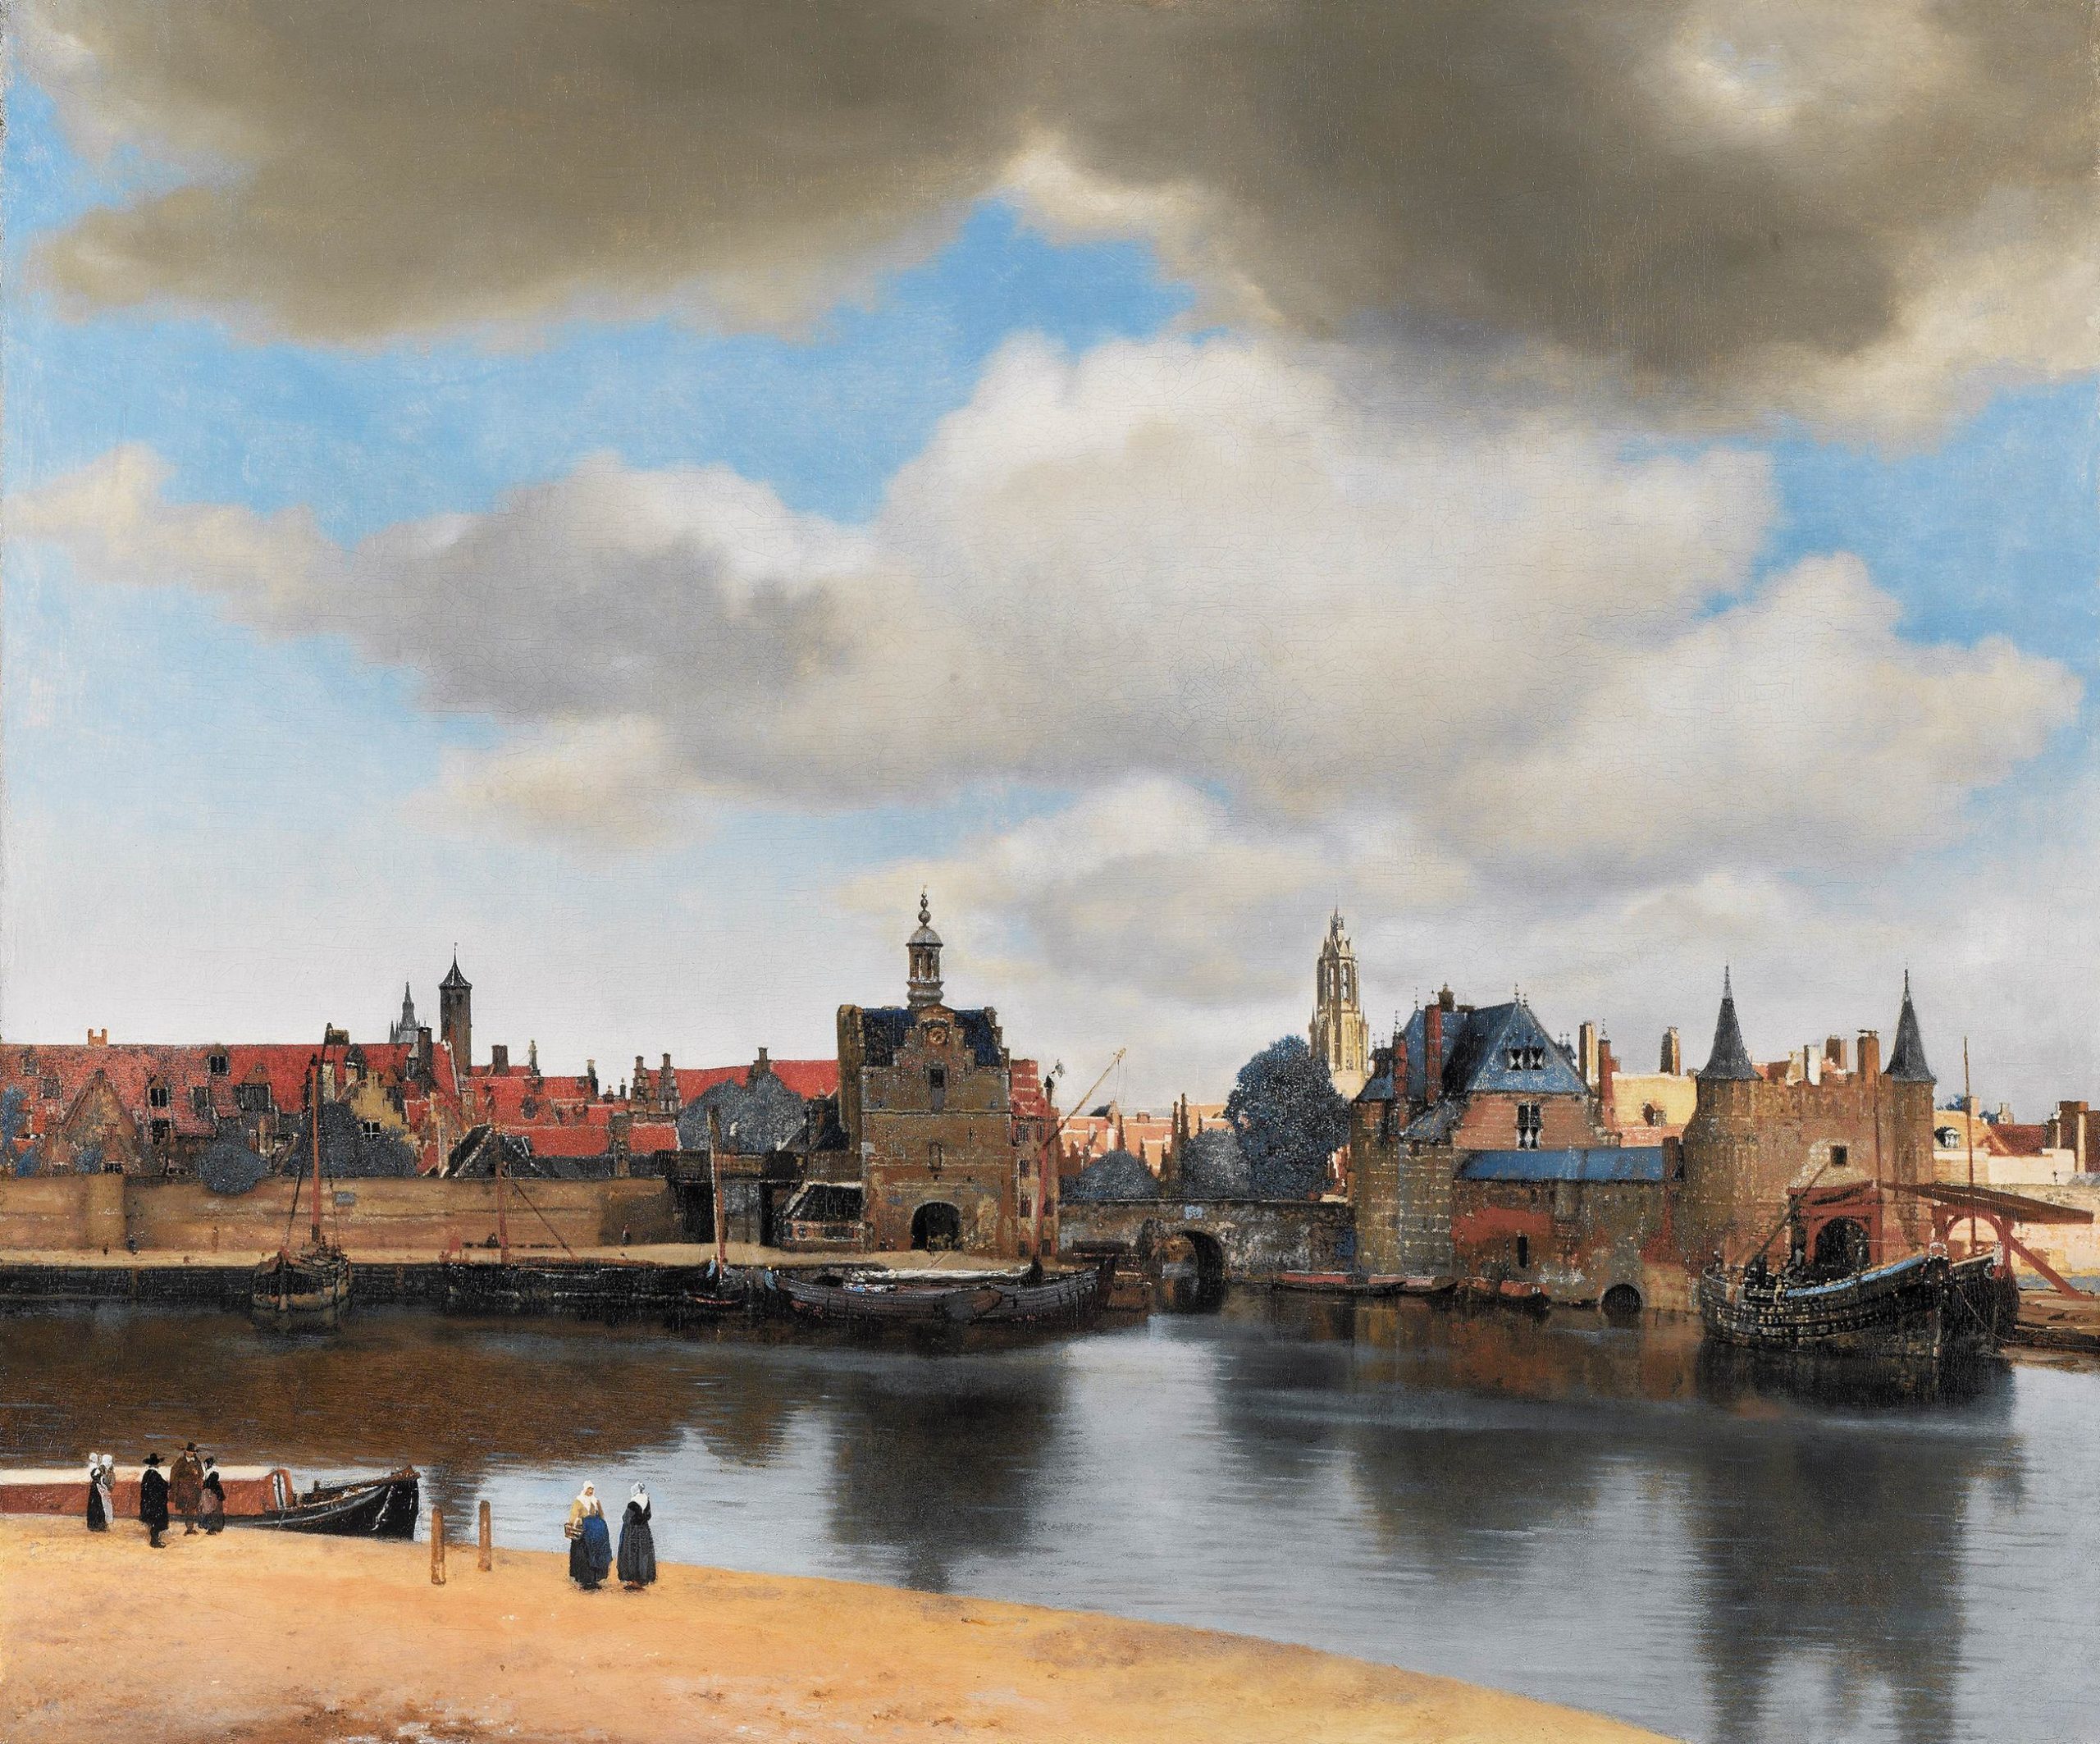 A landscape view of a town overlooking a river